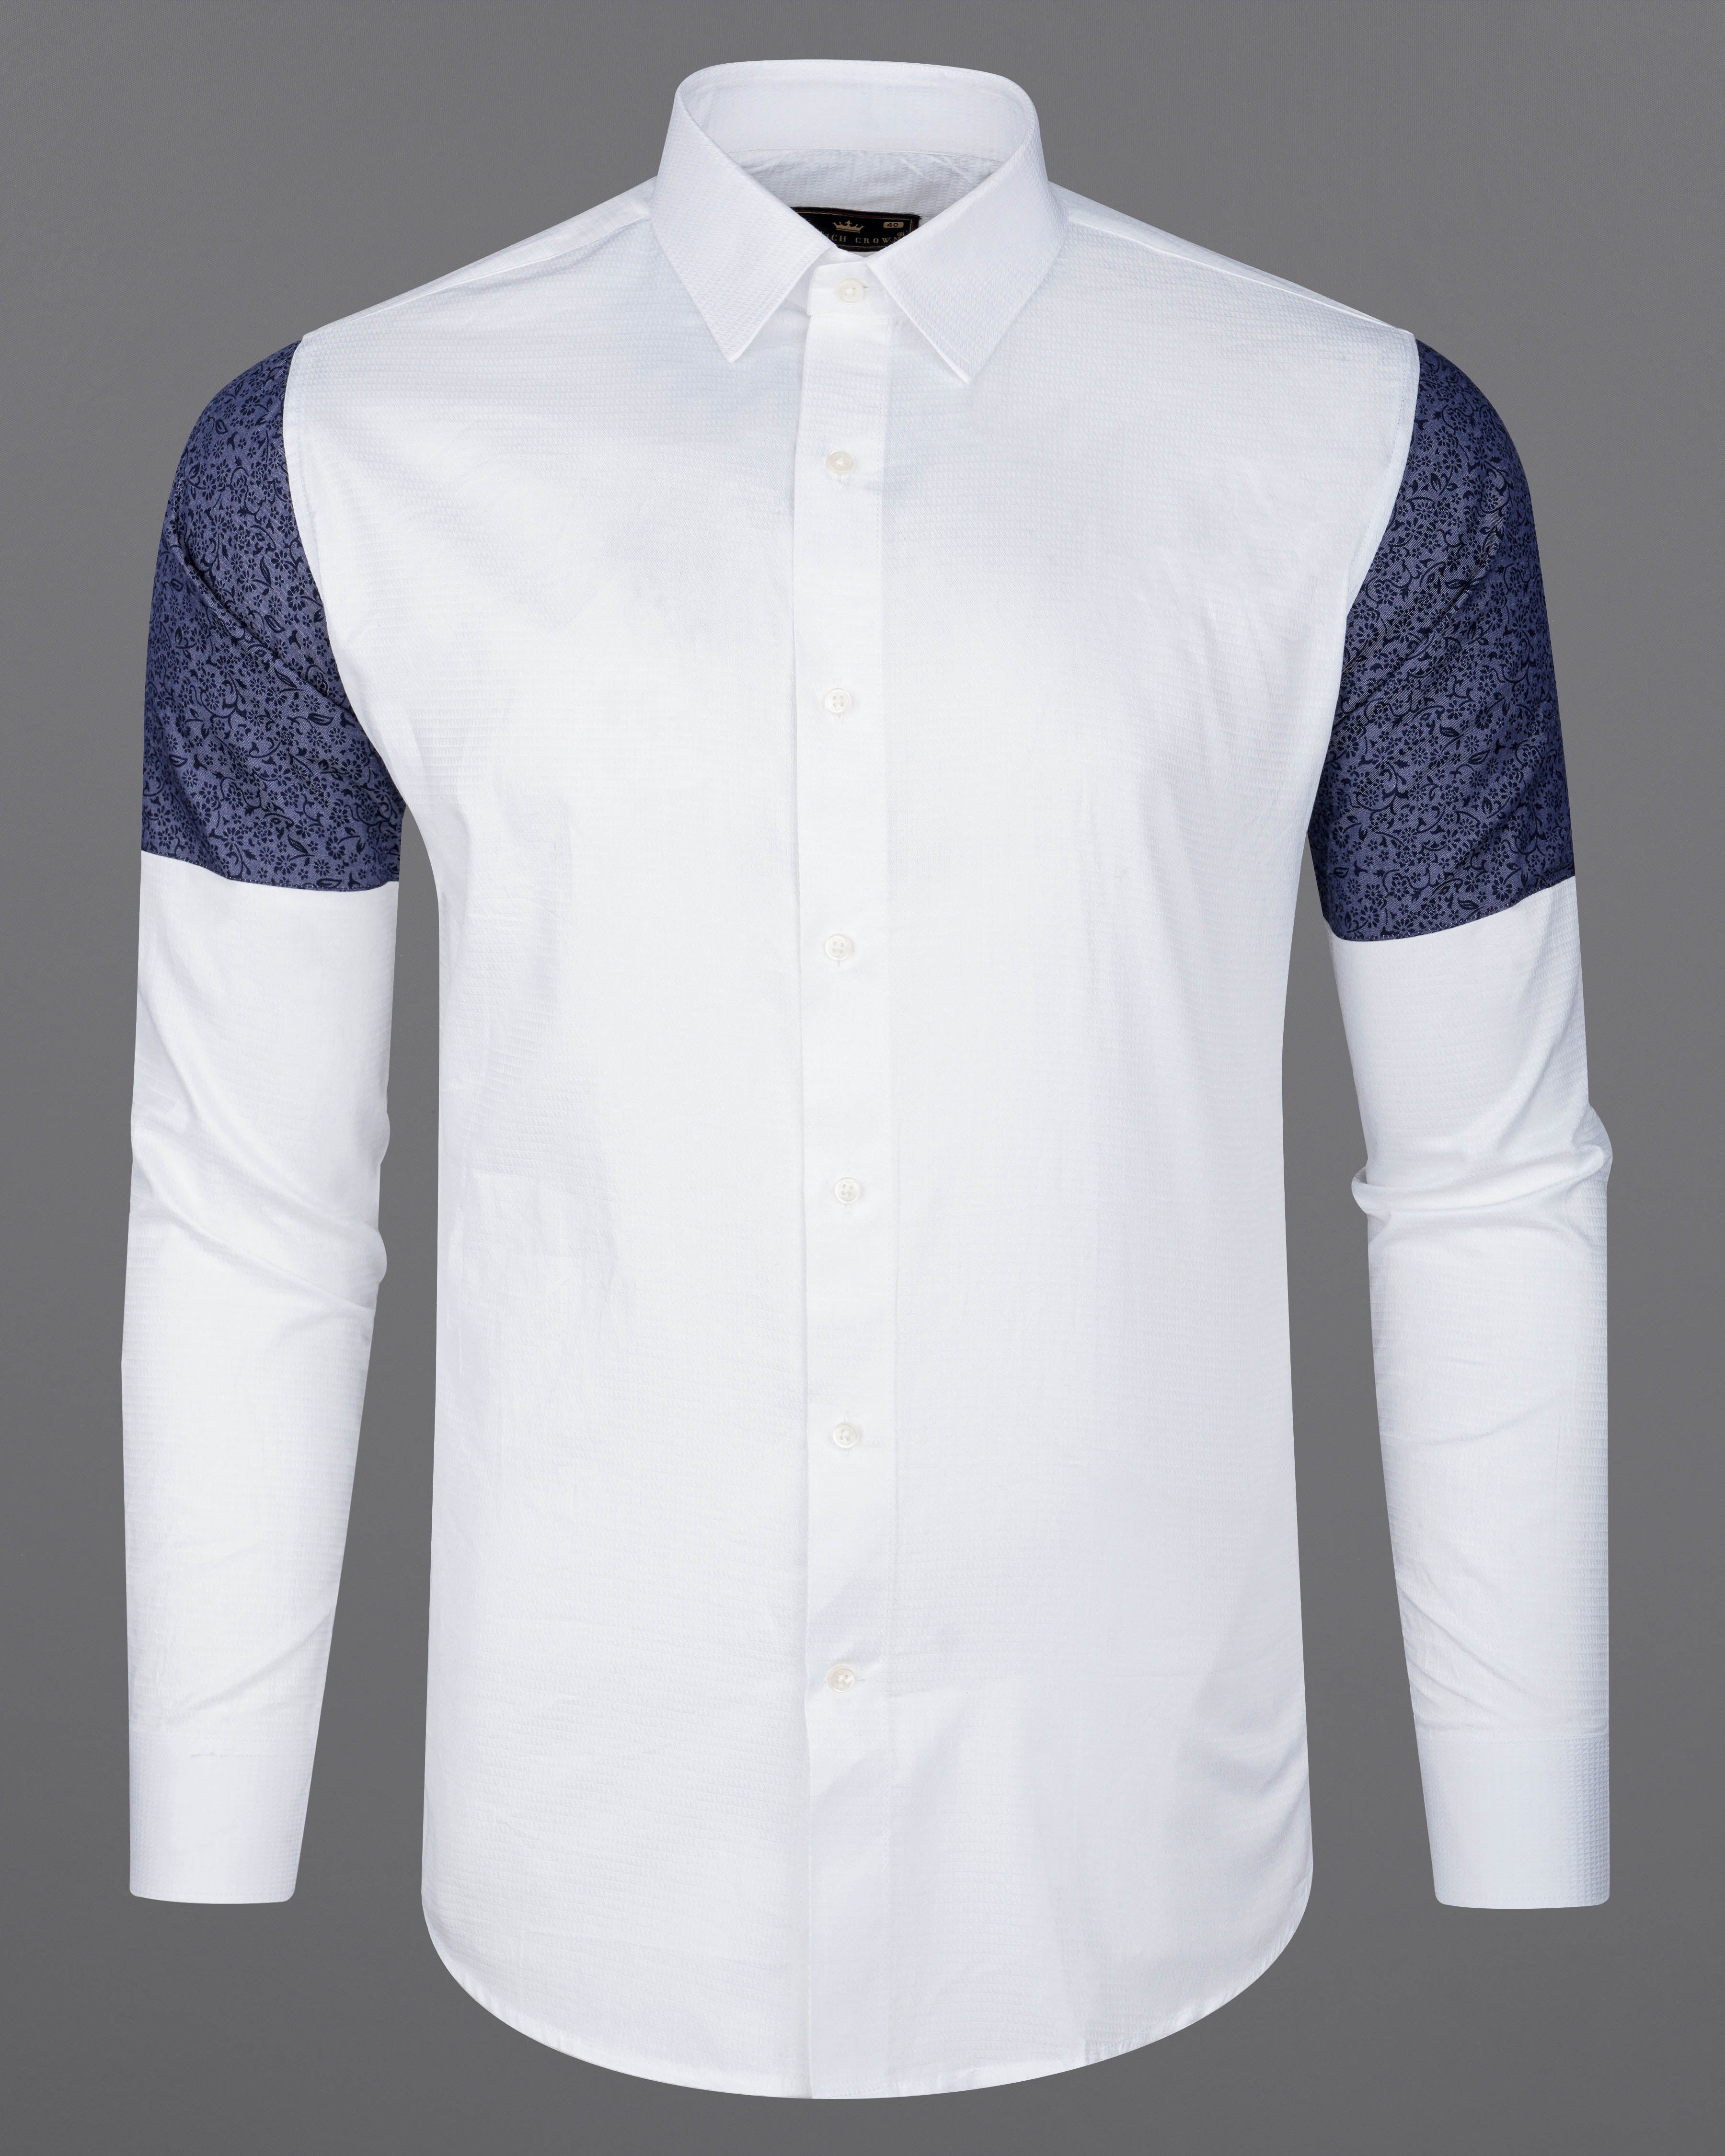 Bright White with Blue Patch Work Dobby Textured Giza Cotton Designer Shirt 8216-P195 -38,8216-P195 -H-38,8216-P195 -39,8216-P195 -H-39,8216-P195 -40,8216-P195 -H-40,8216-P195 -42,8216-P195 -H-42,8216-P195 -44,8216-P195 -H-44,8216-P195 -46,8216-P195 -H-46,8216-P195 -48,8216-P195 -H-48,8216-P195 -50,8216-P195 -H-50,8216-P195 -52,8216-P195 -H-52